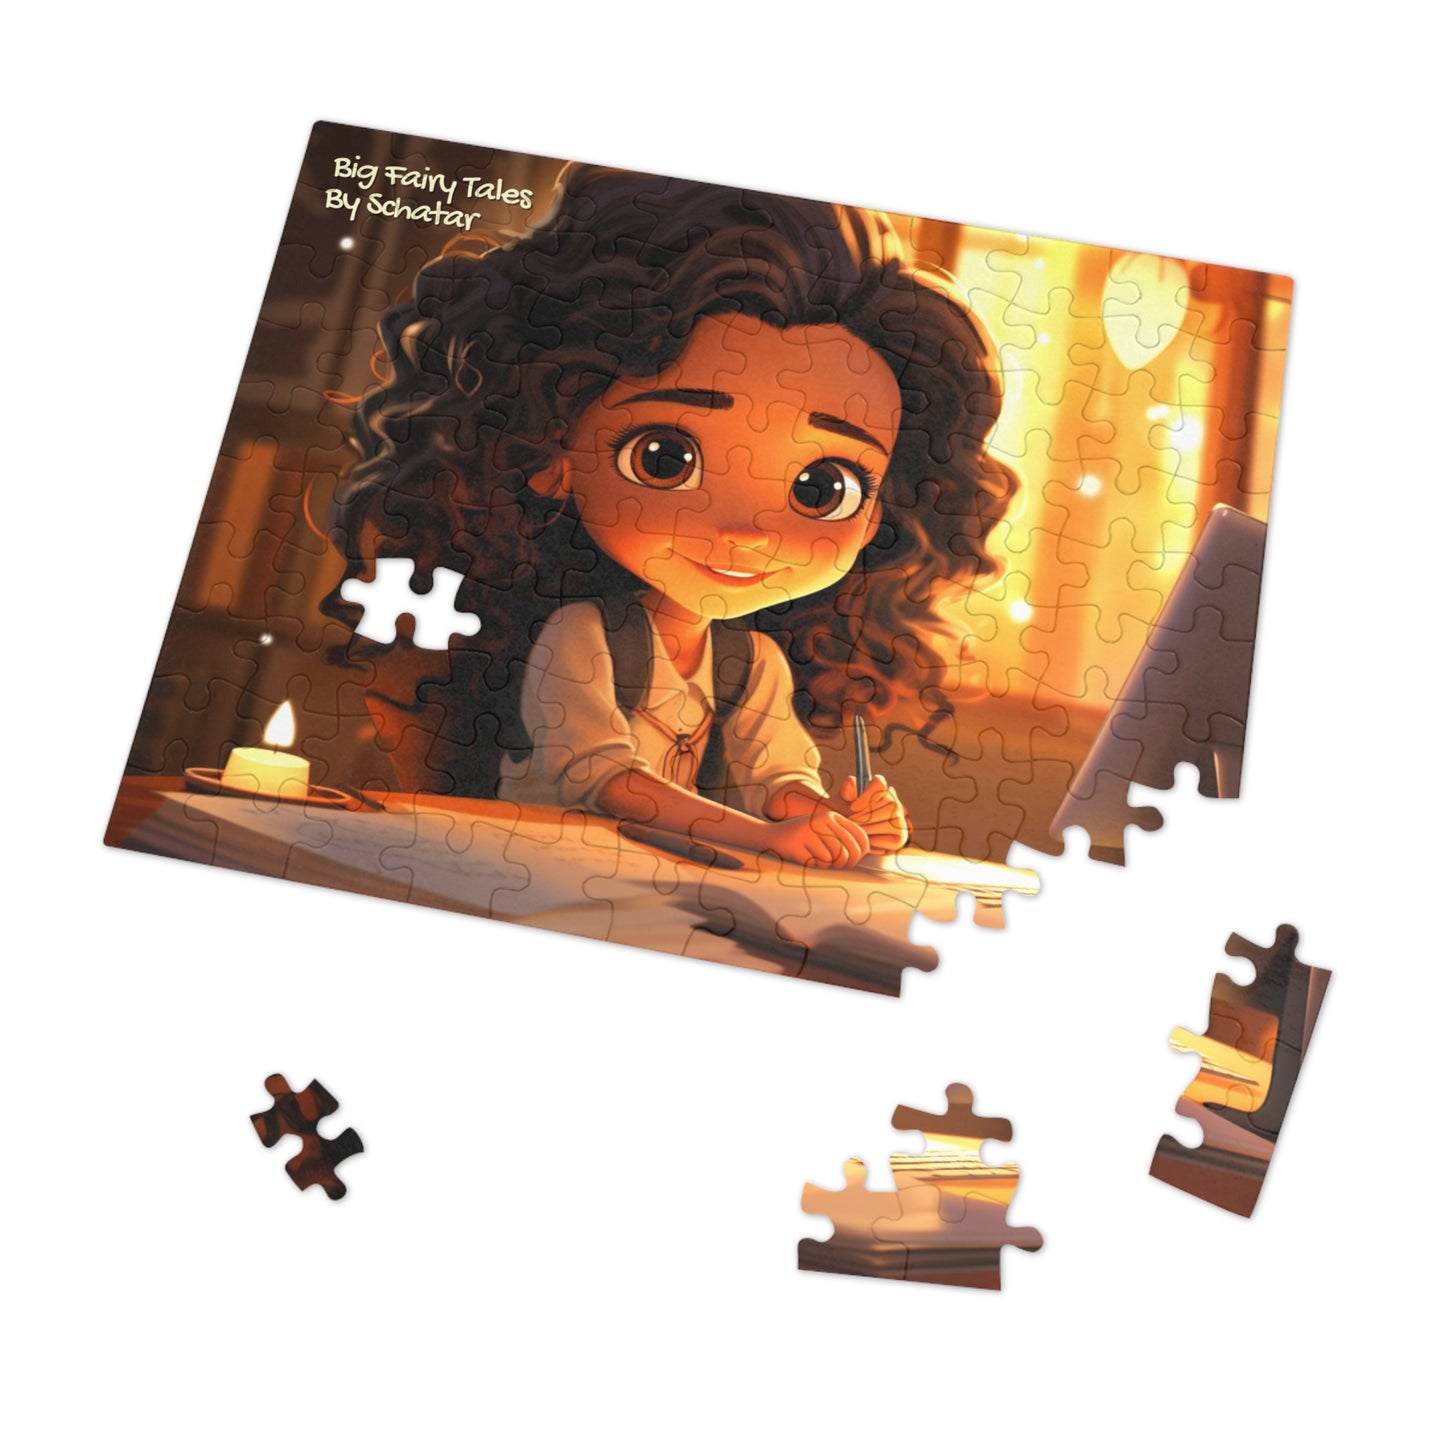 Writer - Big Little Professionals Puzzle 8 From Big Fairy Tales By Schatar